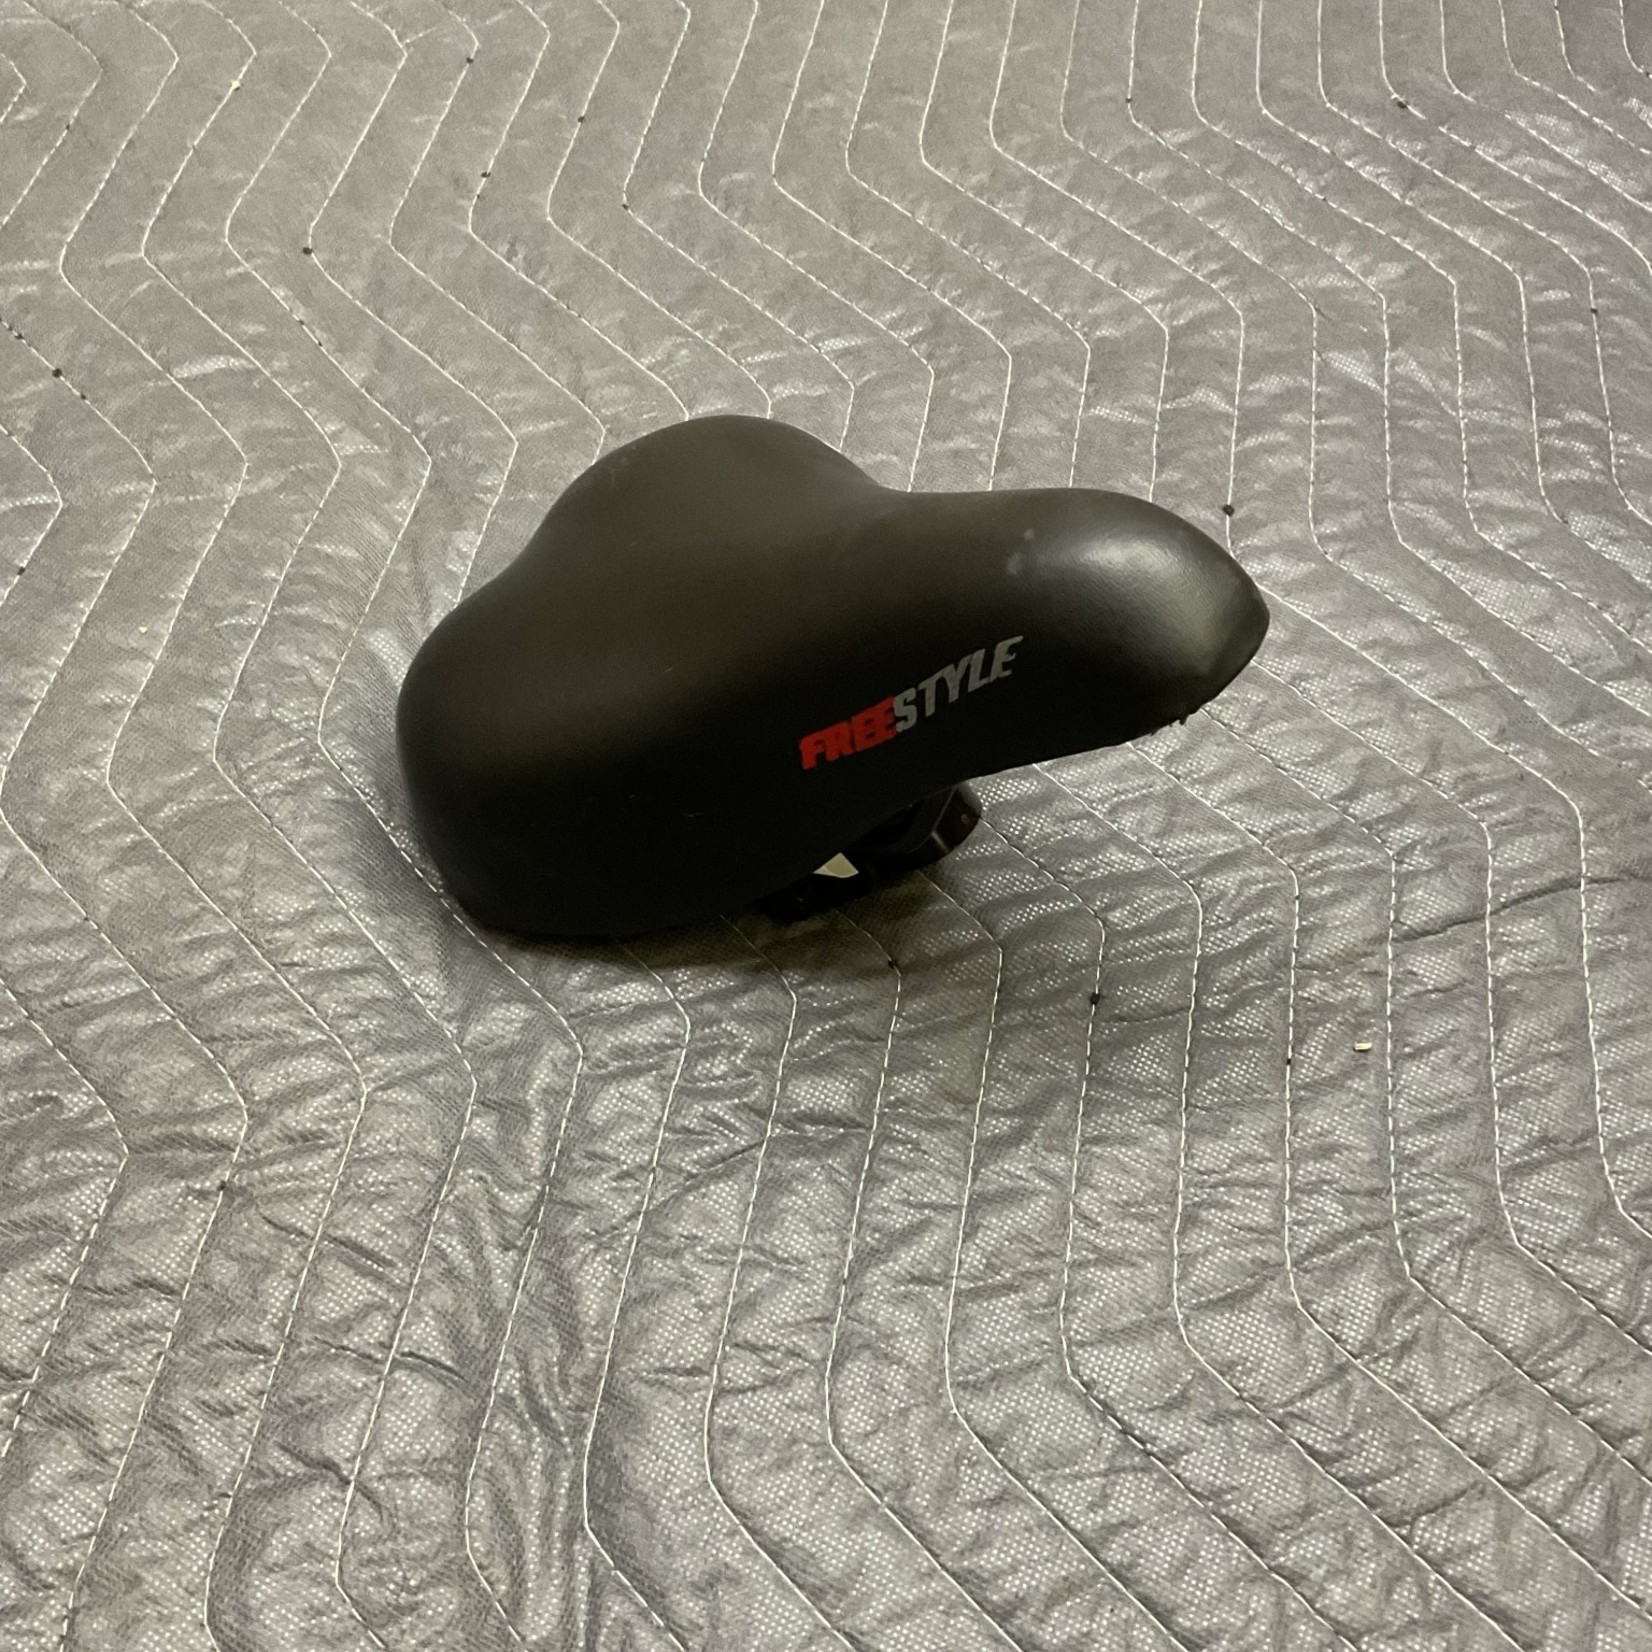 Freestyle Children's Bicycle Seat (Black & Red)